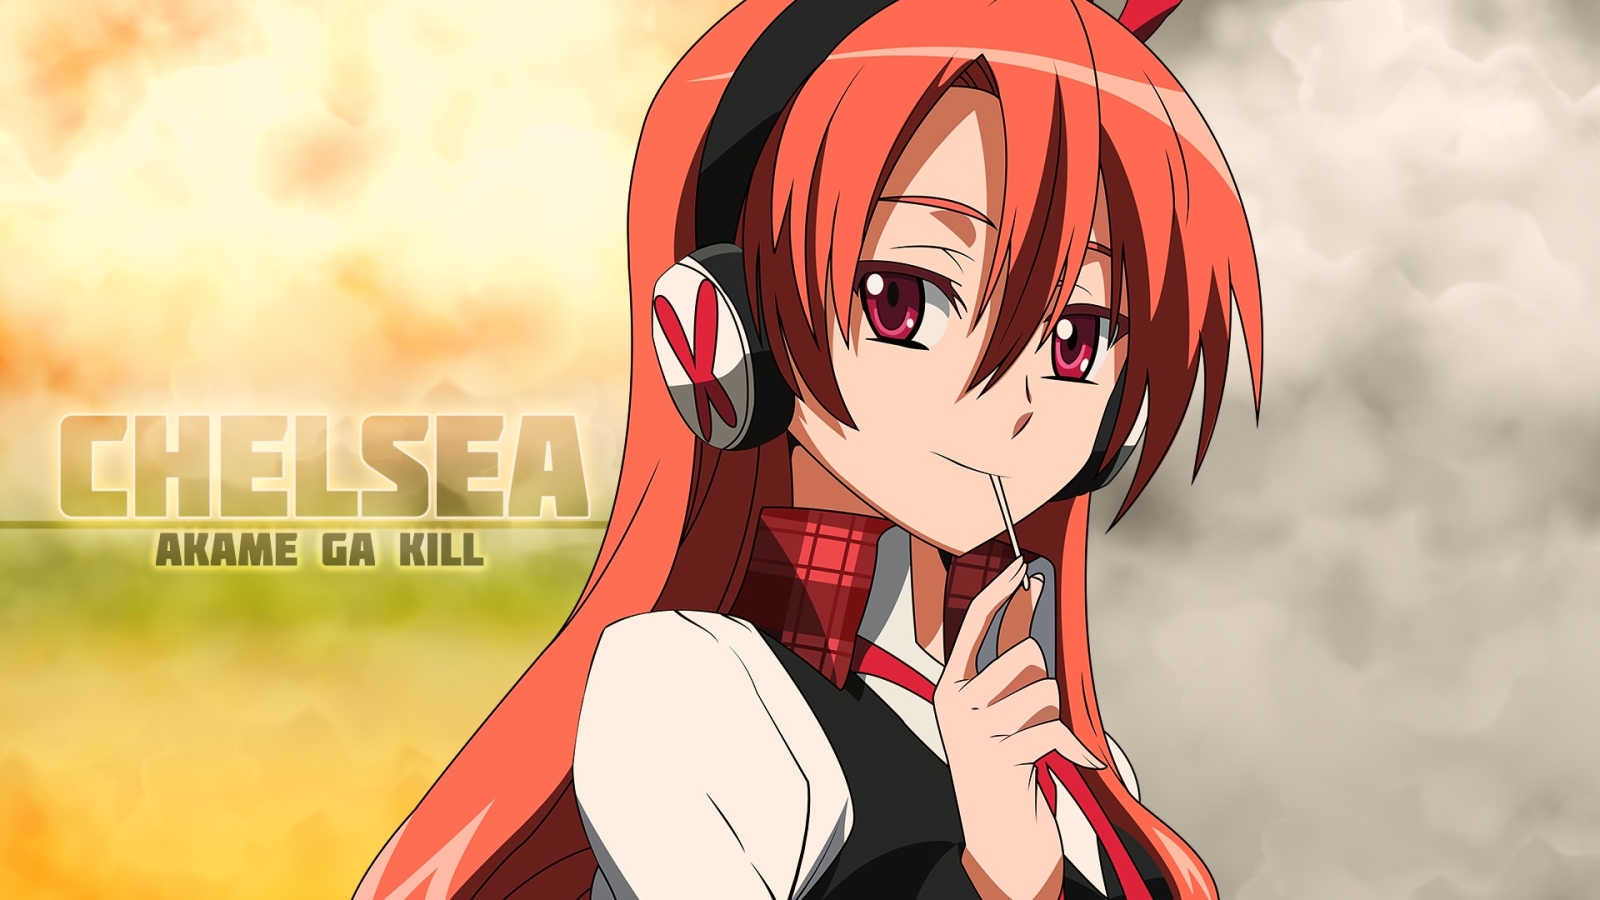 1600x900 chelsea, akame ga kill, anime 1600x900 Resolution Wallpaper, HD  Anime 4K Wallpapers, Images, Photos and Background - Wallpapers Den